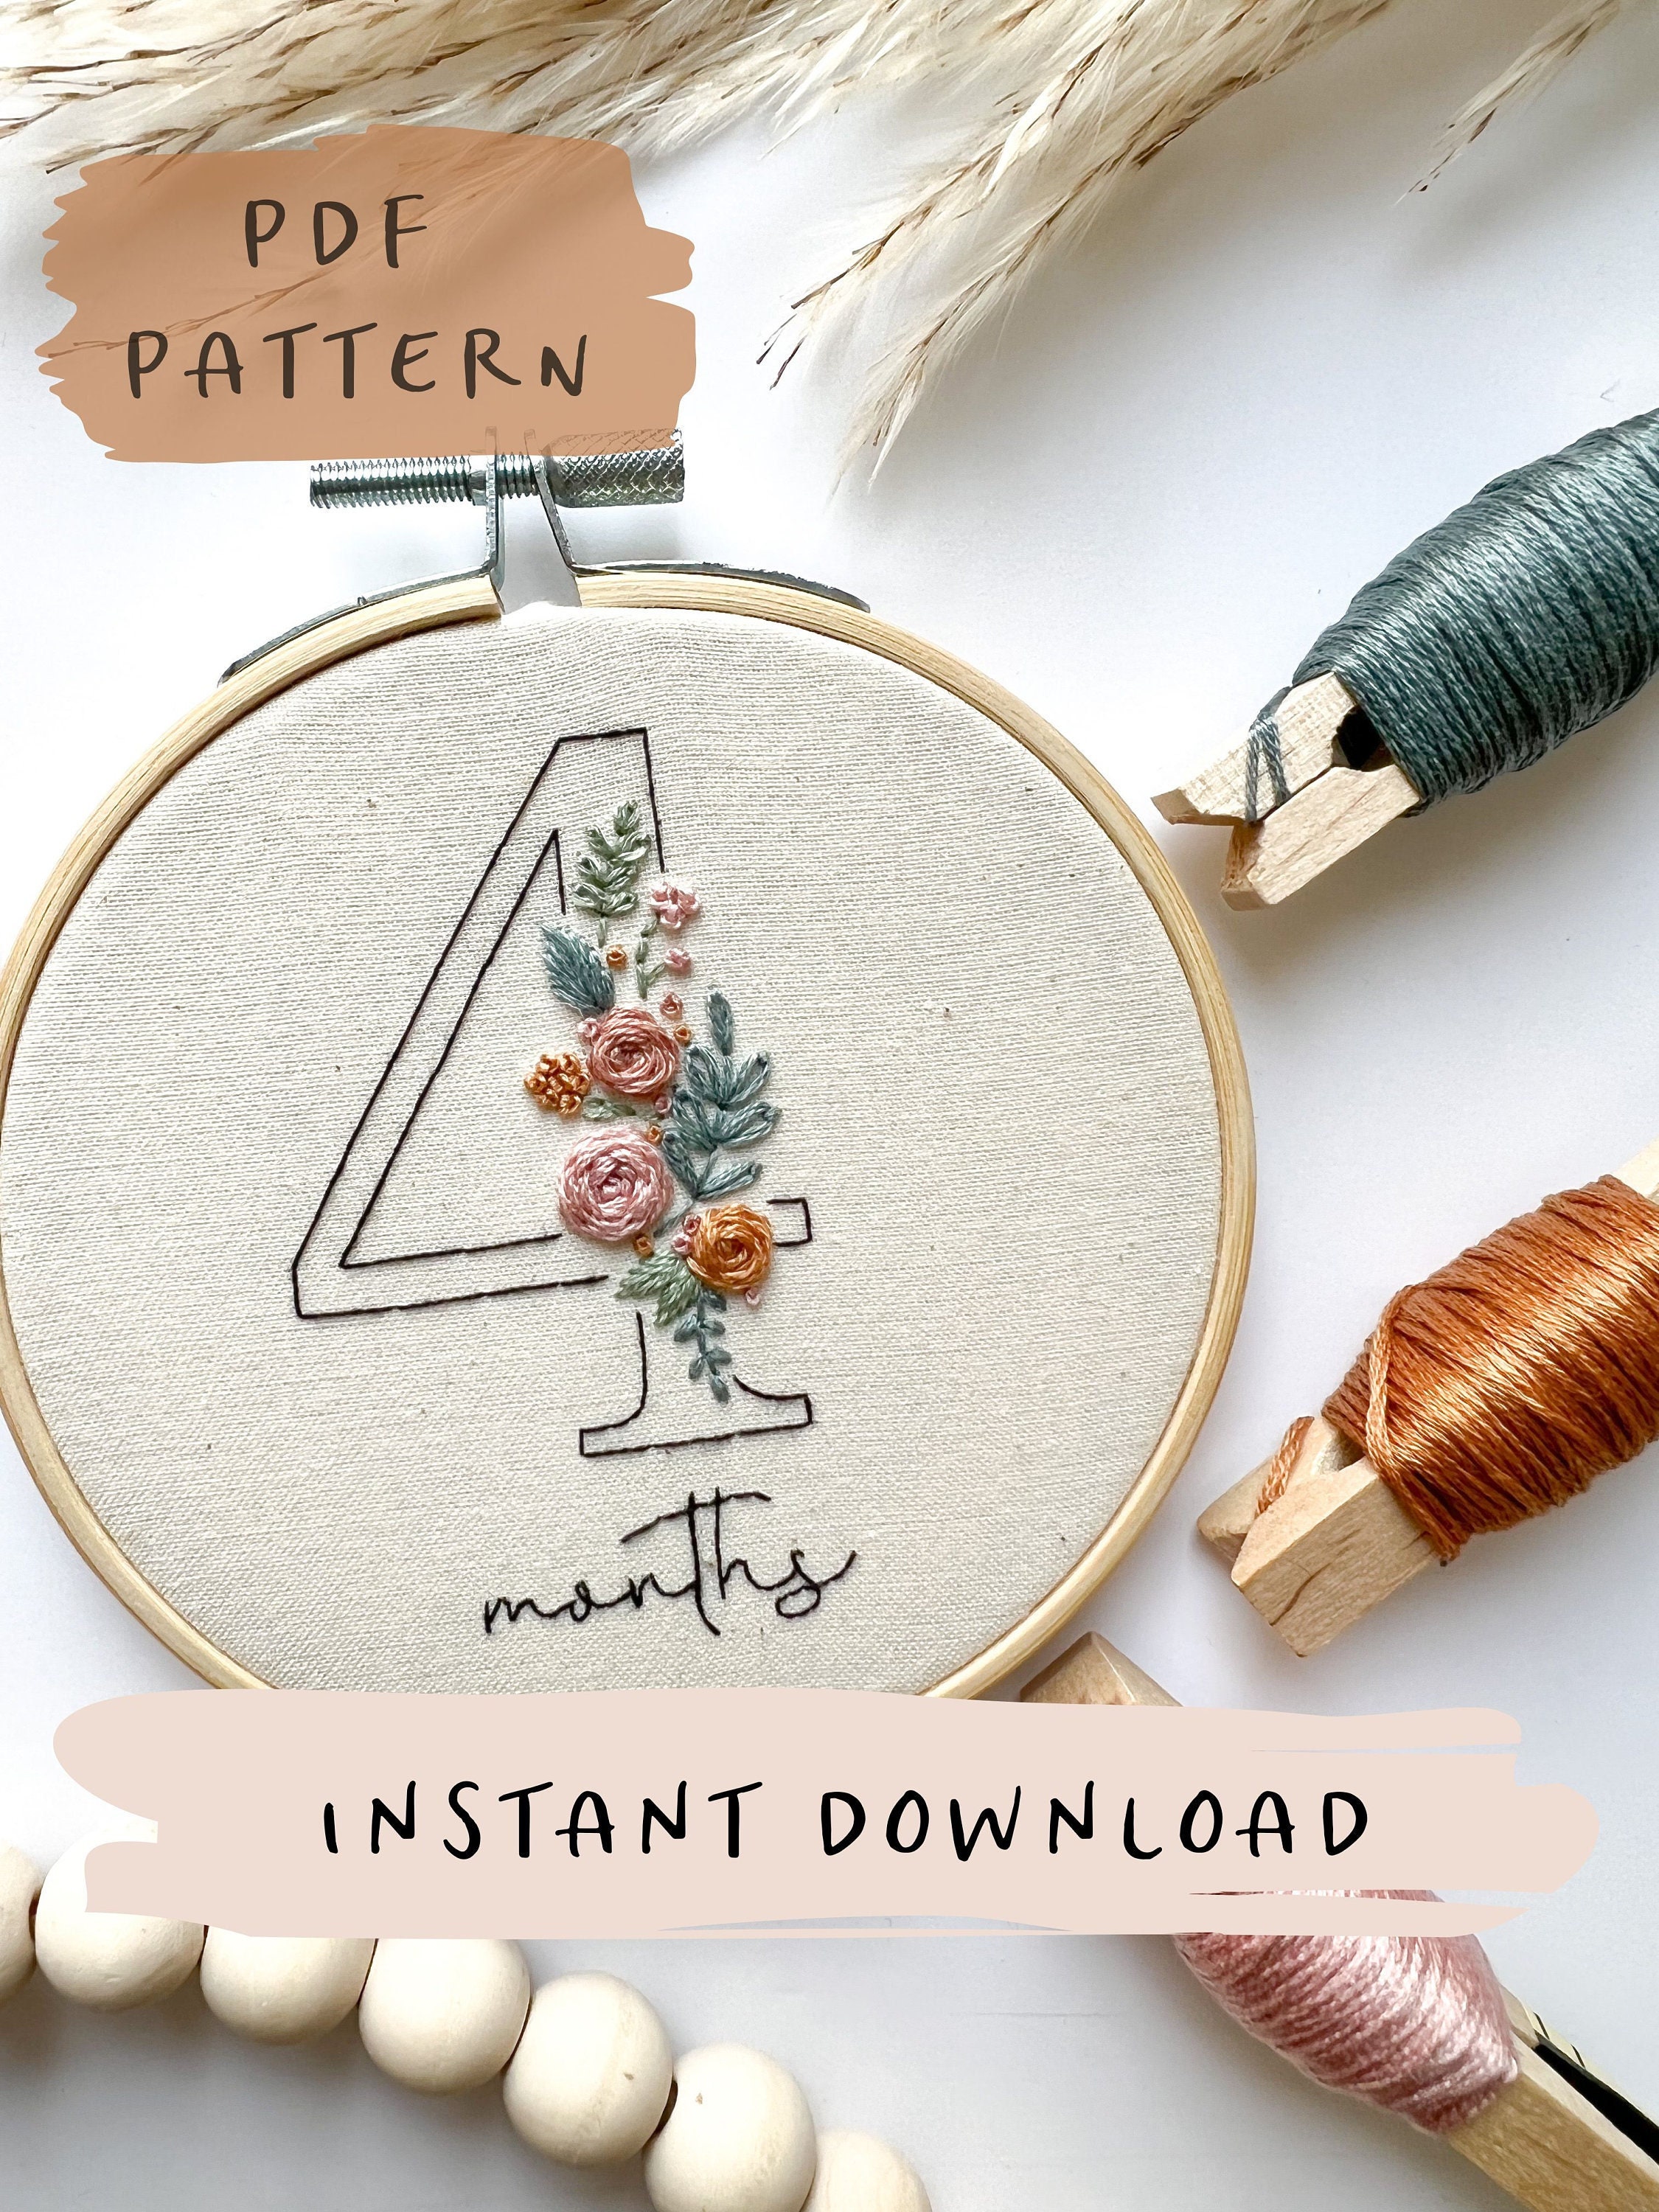 Blank Embroidery Calendar Pattern 365 Days of Stitching Monthly